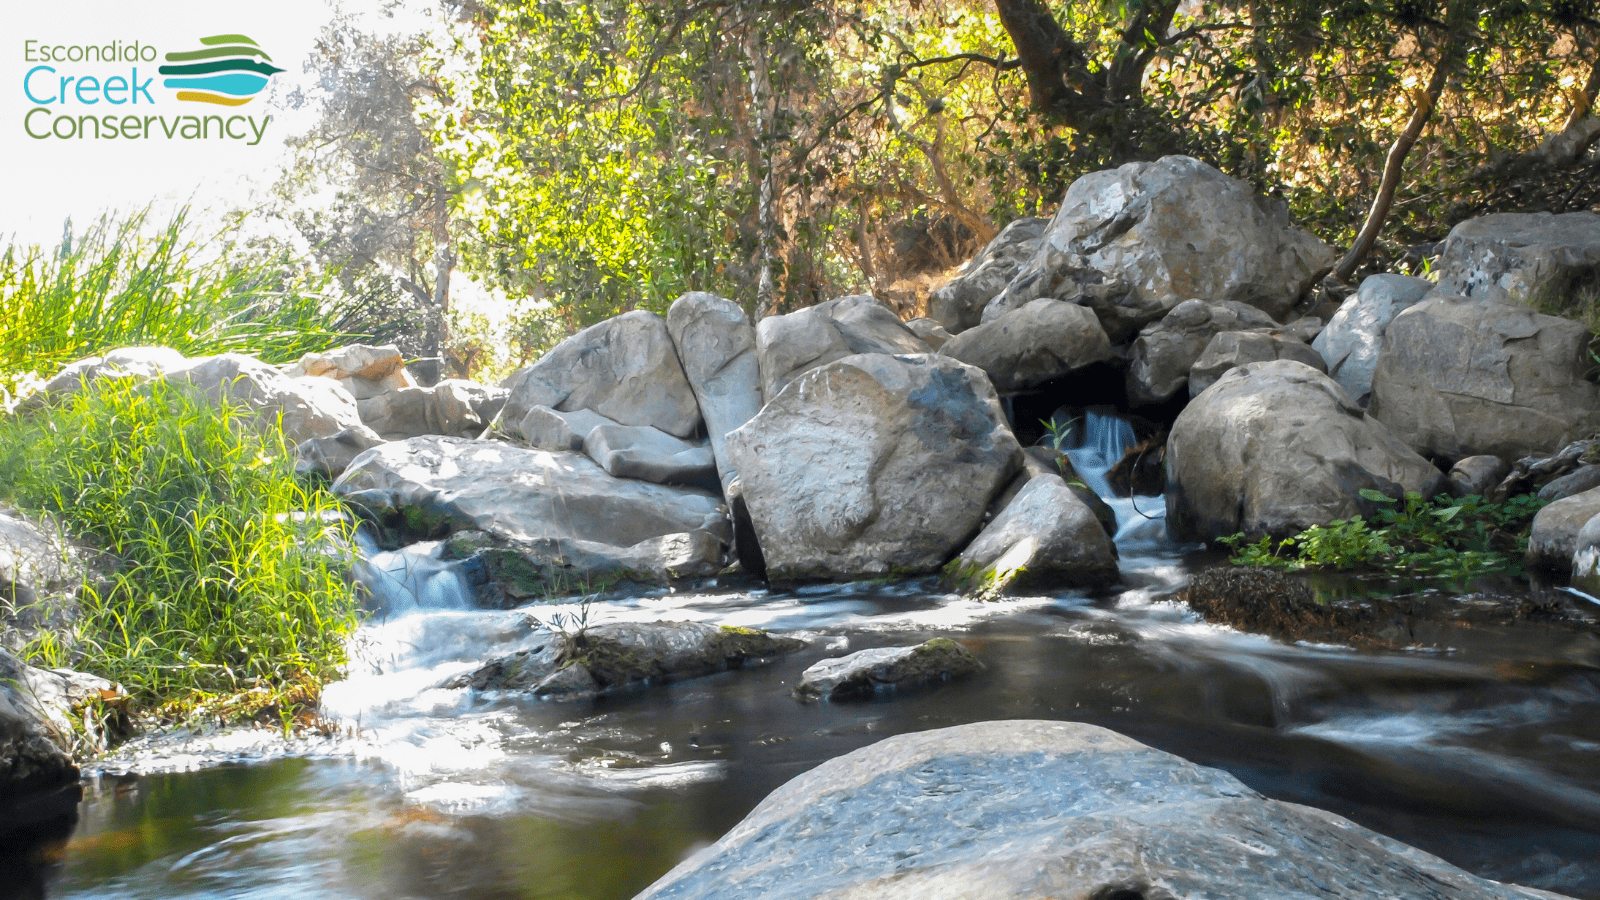 A wide shot of a bend in a creek. Rushing water pools around oversized boulders under trees. The sun shines through illuminating the water which has a green algae image.